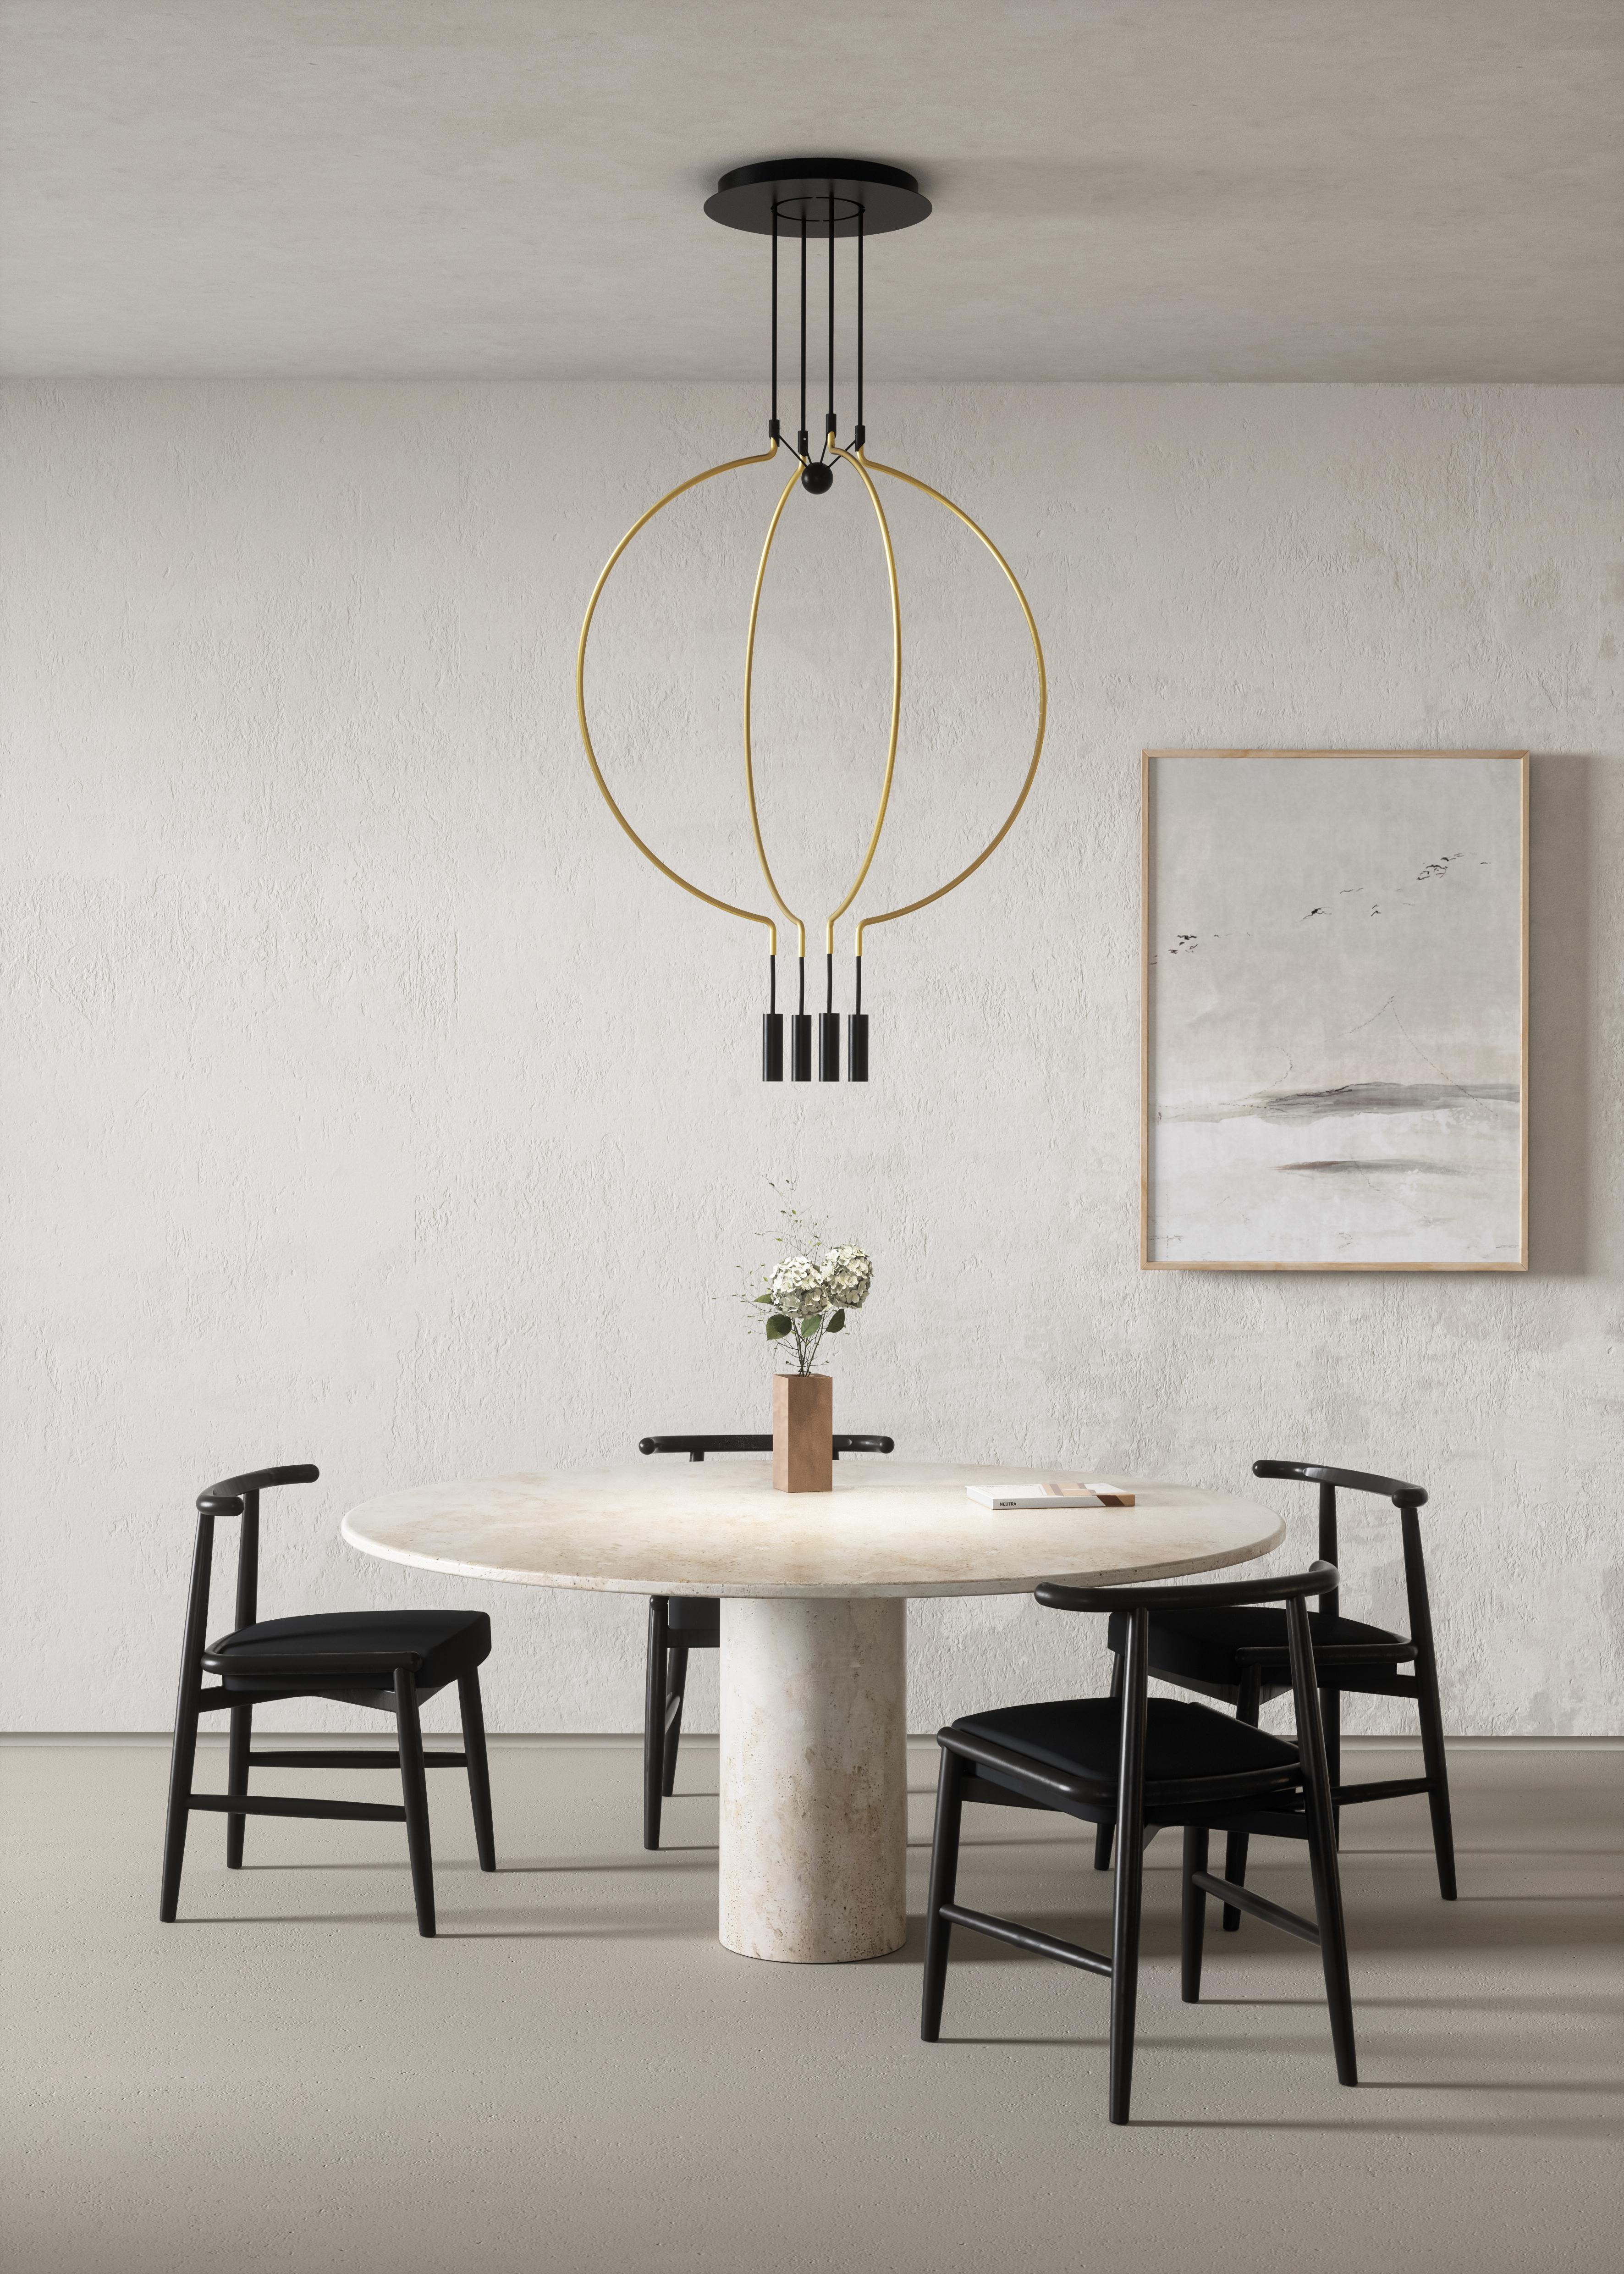 Axolight Liaison Model M8 Pendant Lamp in Black/Black by Sara Moroni

Modular lightness and elegance. Liaison tells about the perfect balance of three geometric archetypes: sphere, circle and cylinder compose a system that includes the single